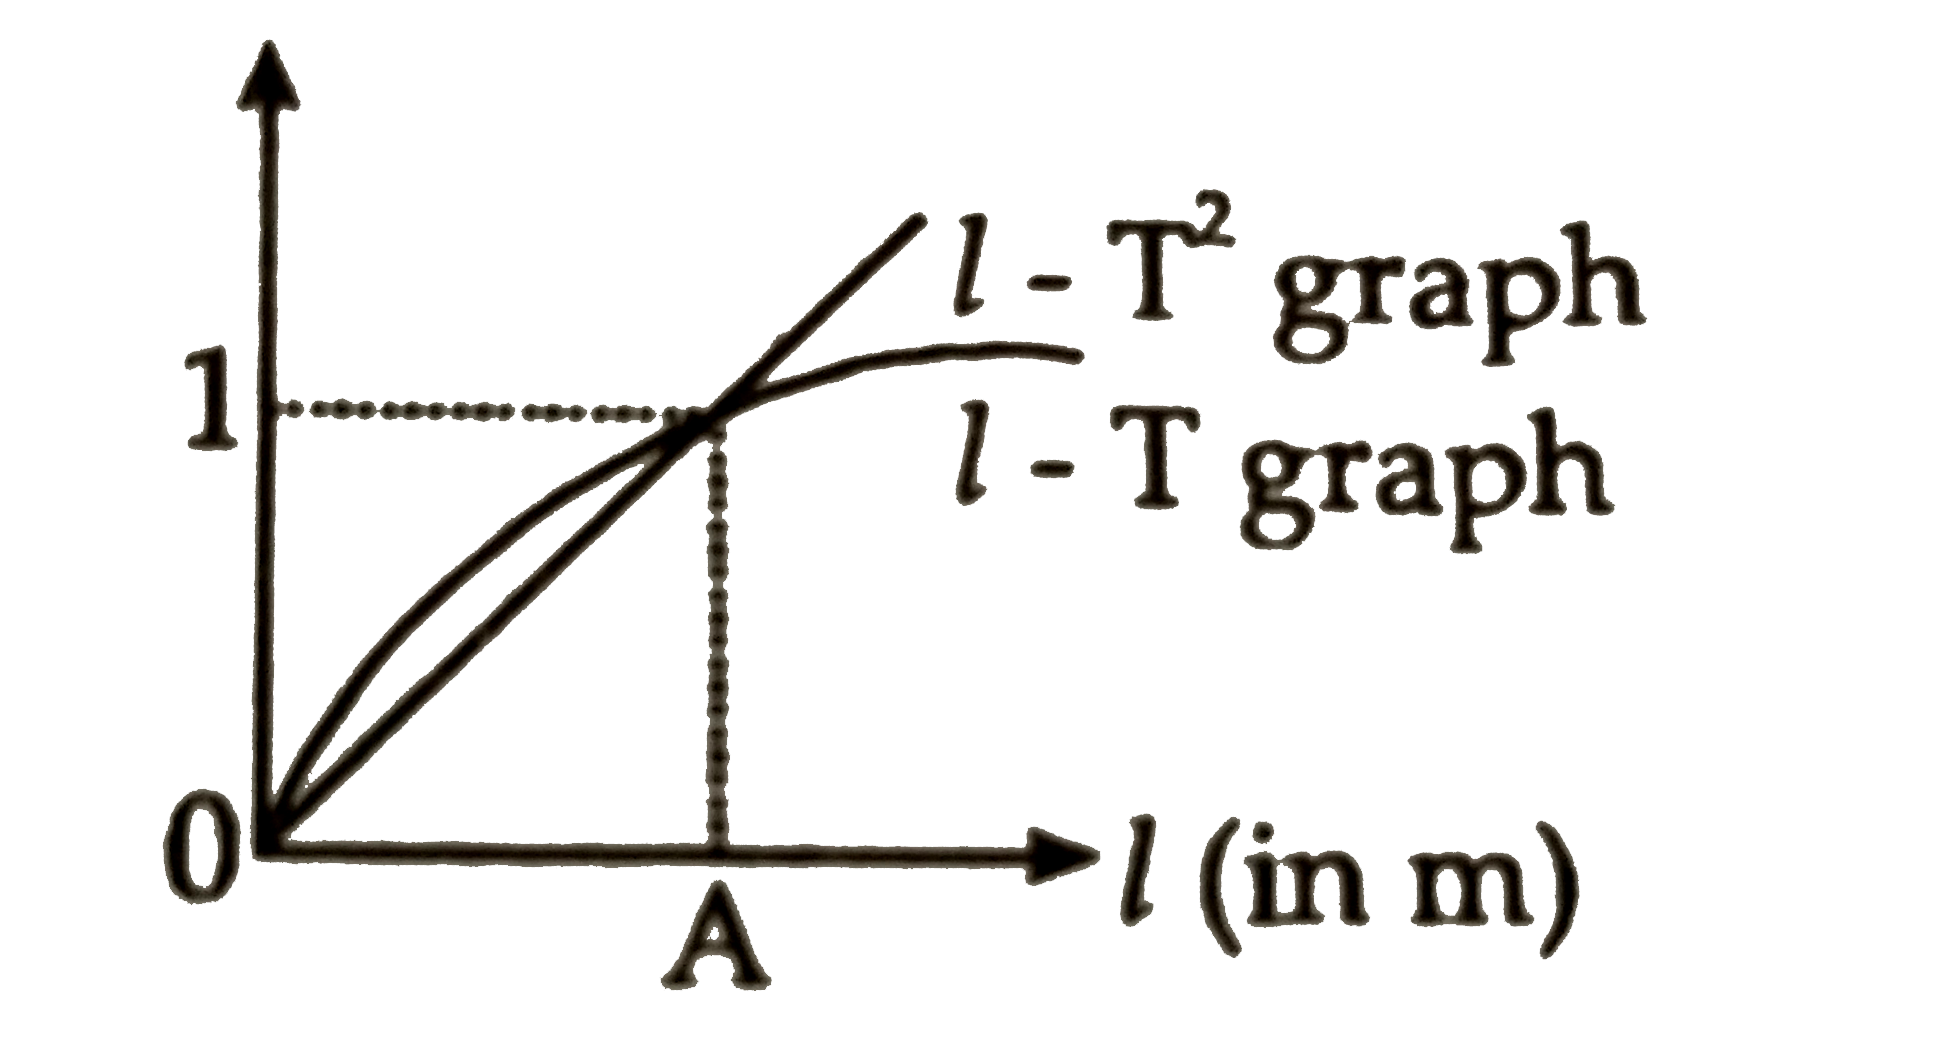 l - T and l-T^(2) graphs of a simple pendulum on earth are as shown in the figure. The x-coordiante (OA) of point of intersection of the graphs is nearly equal to (on the earth g = 9.8ms^(-2))